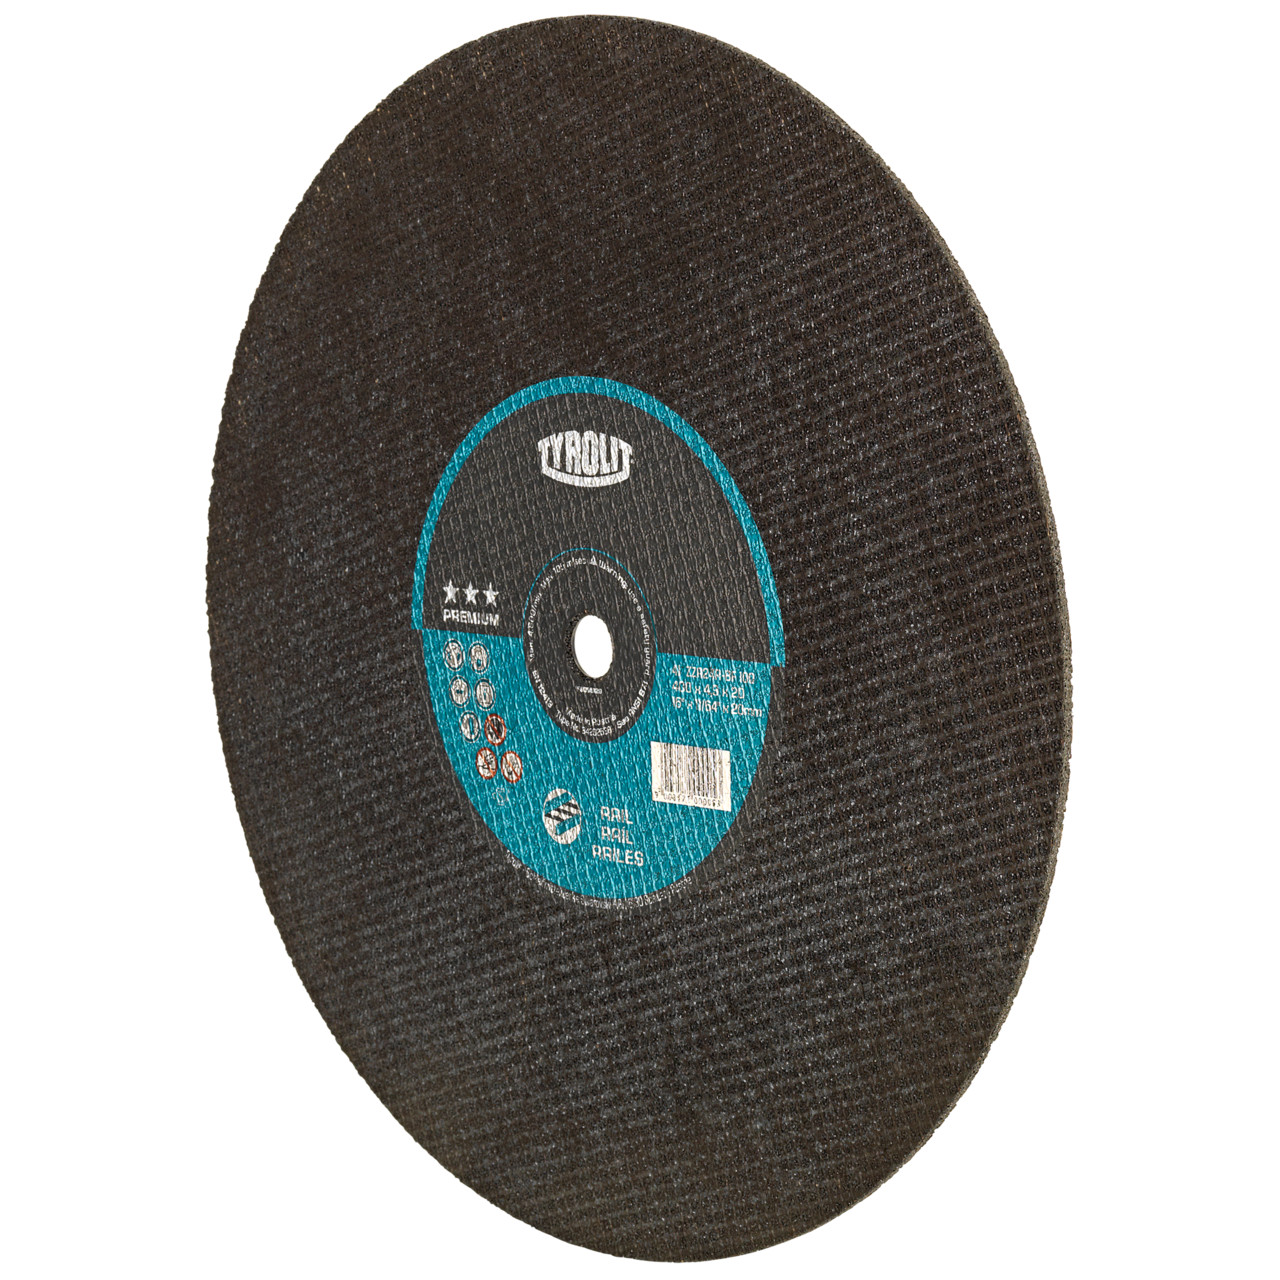 Tyrolit Cutting discs DxDxH 350x3.8x20 For rails for guided freehand cutting, shape: 41 - straight version, Art. 34202534